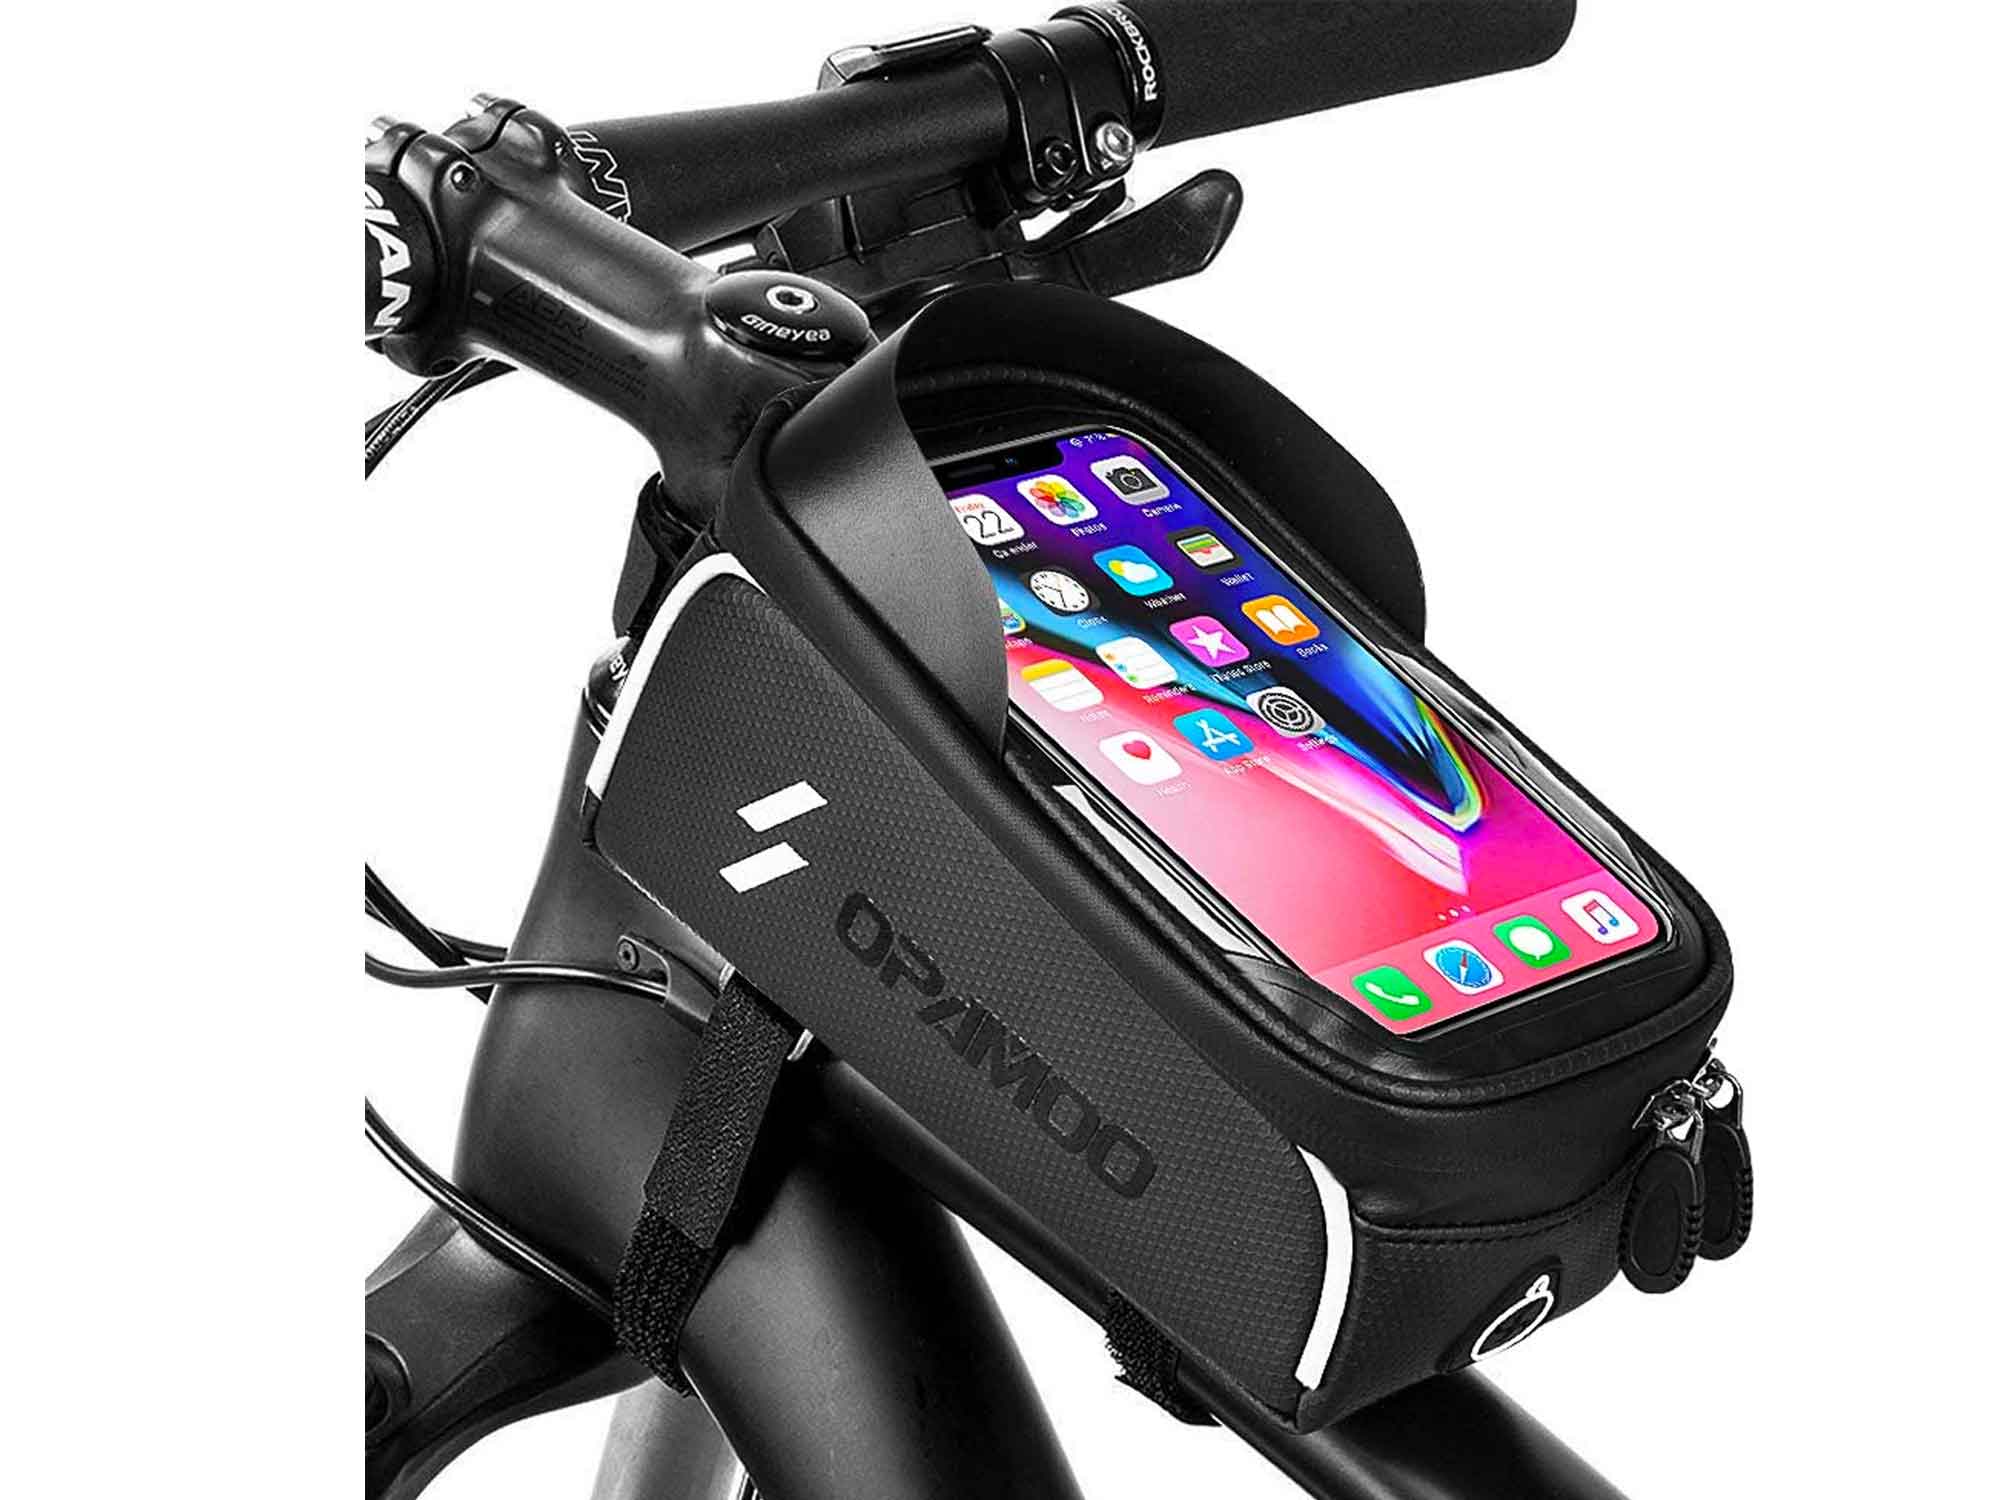 Bike Phone Front Frame Bag - Waterproof Bicycle Top Tube Cycling Phone Mount Pack Phone Case for 6.5’’ iPhone Plus xs max